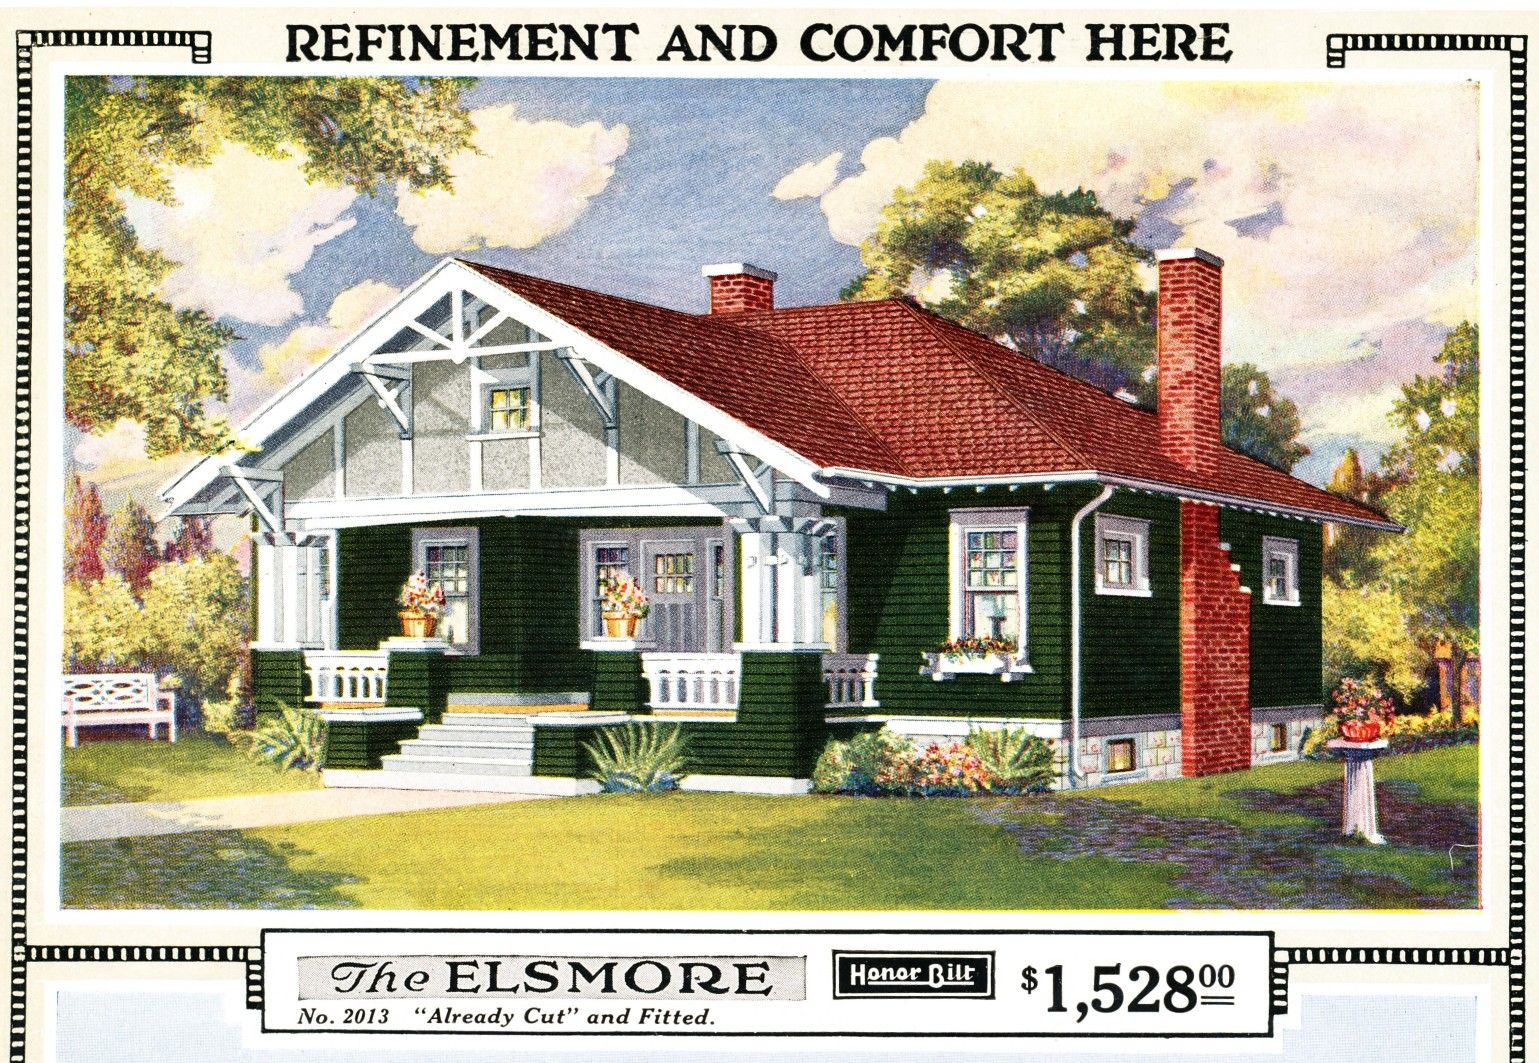 Sears Elsmore from the 1919 catalog